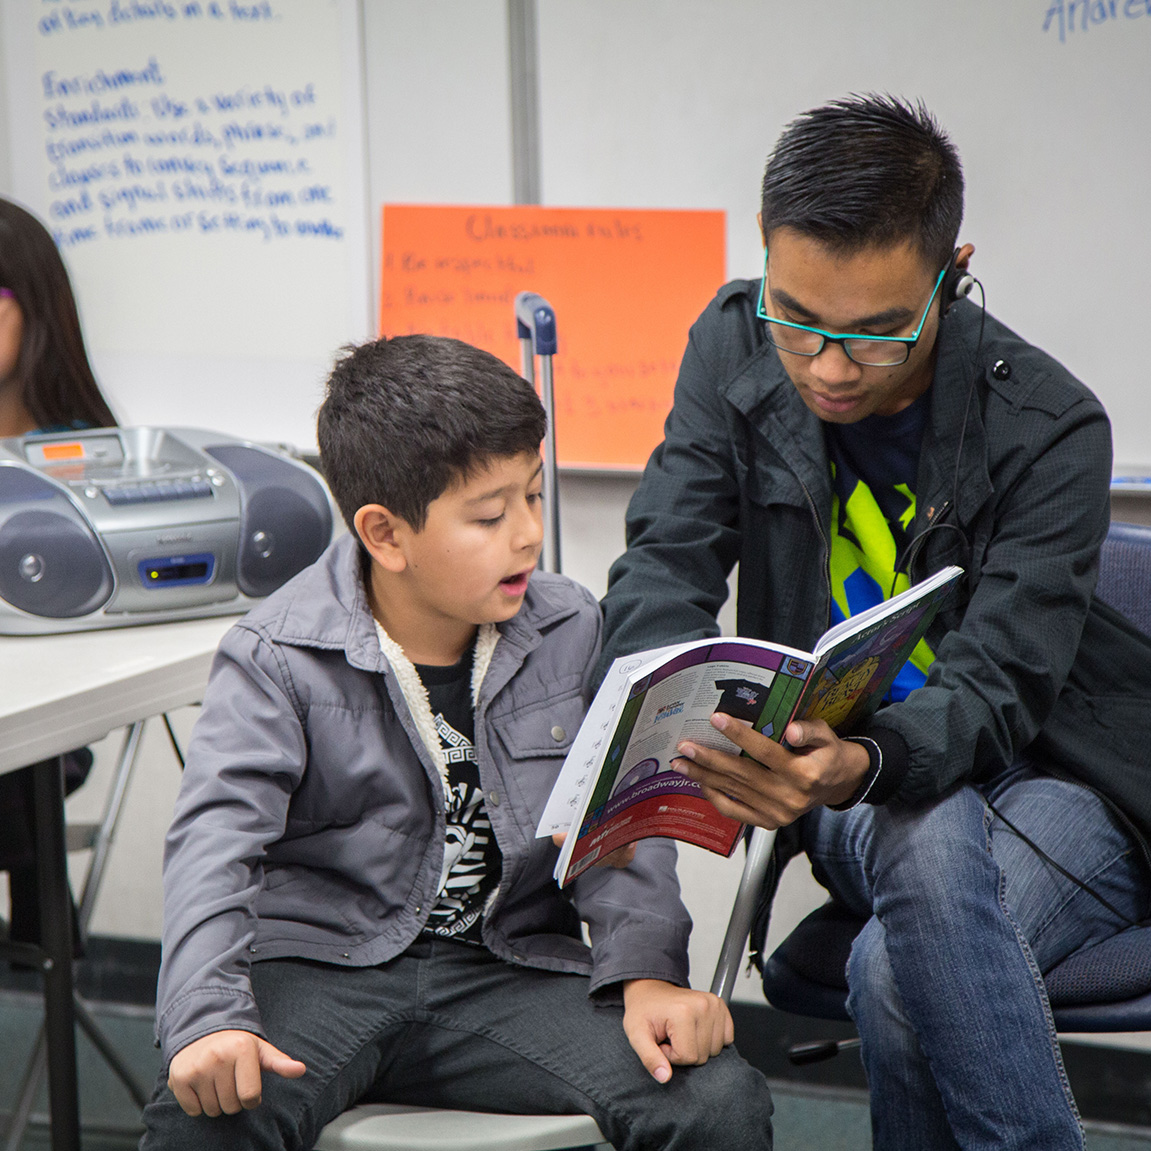 A closeup of a male Teaching Fellow tutor in a CTFF t-shirt and black jacket holding a book while a young male student follows along and reads out loud.